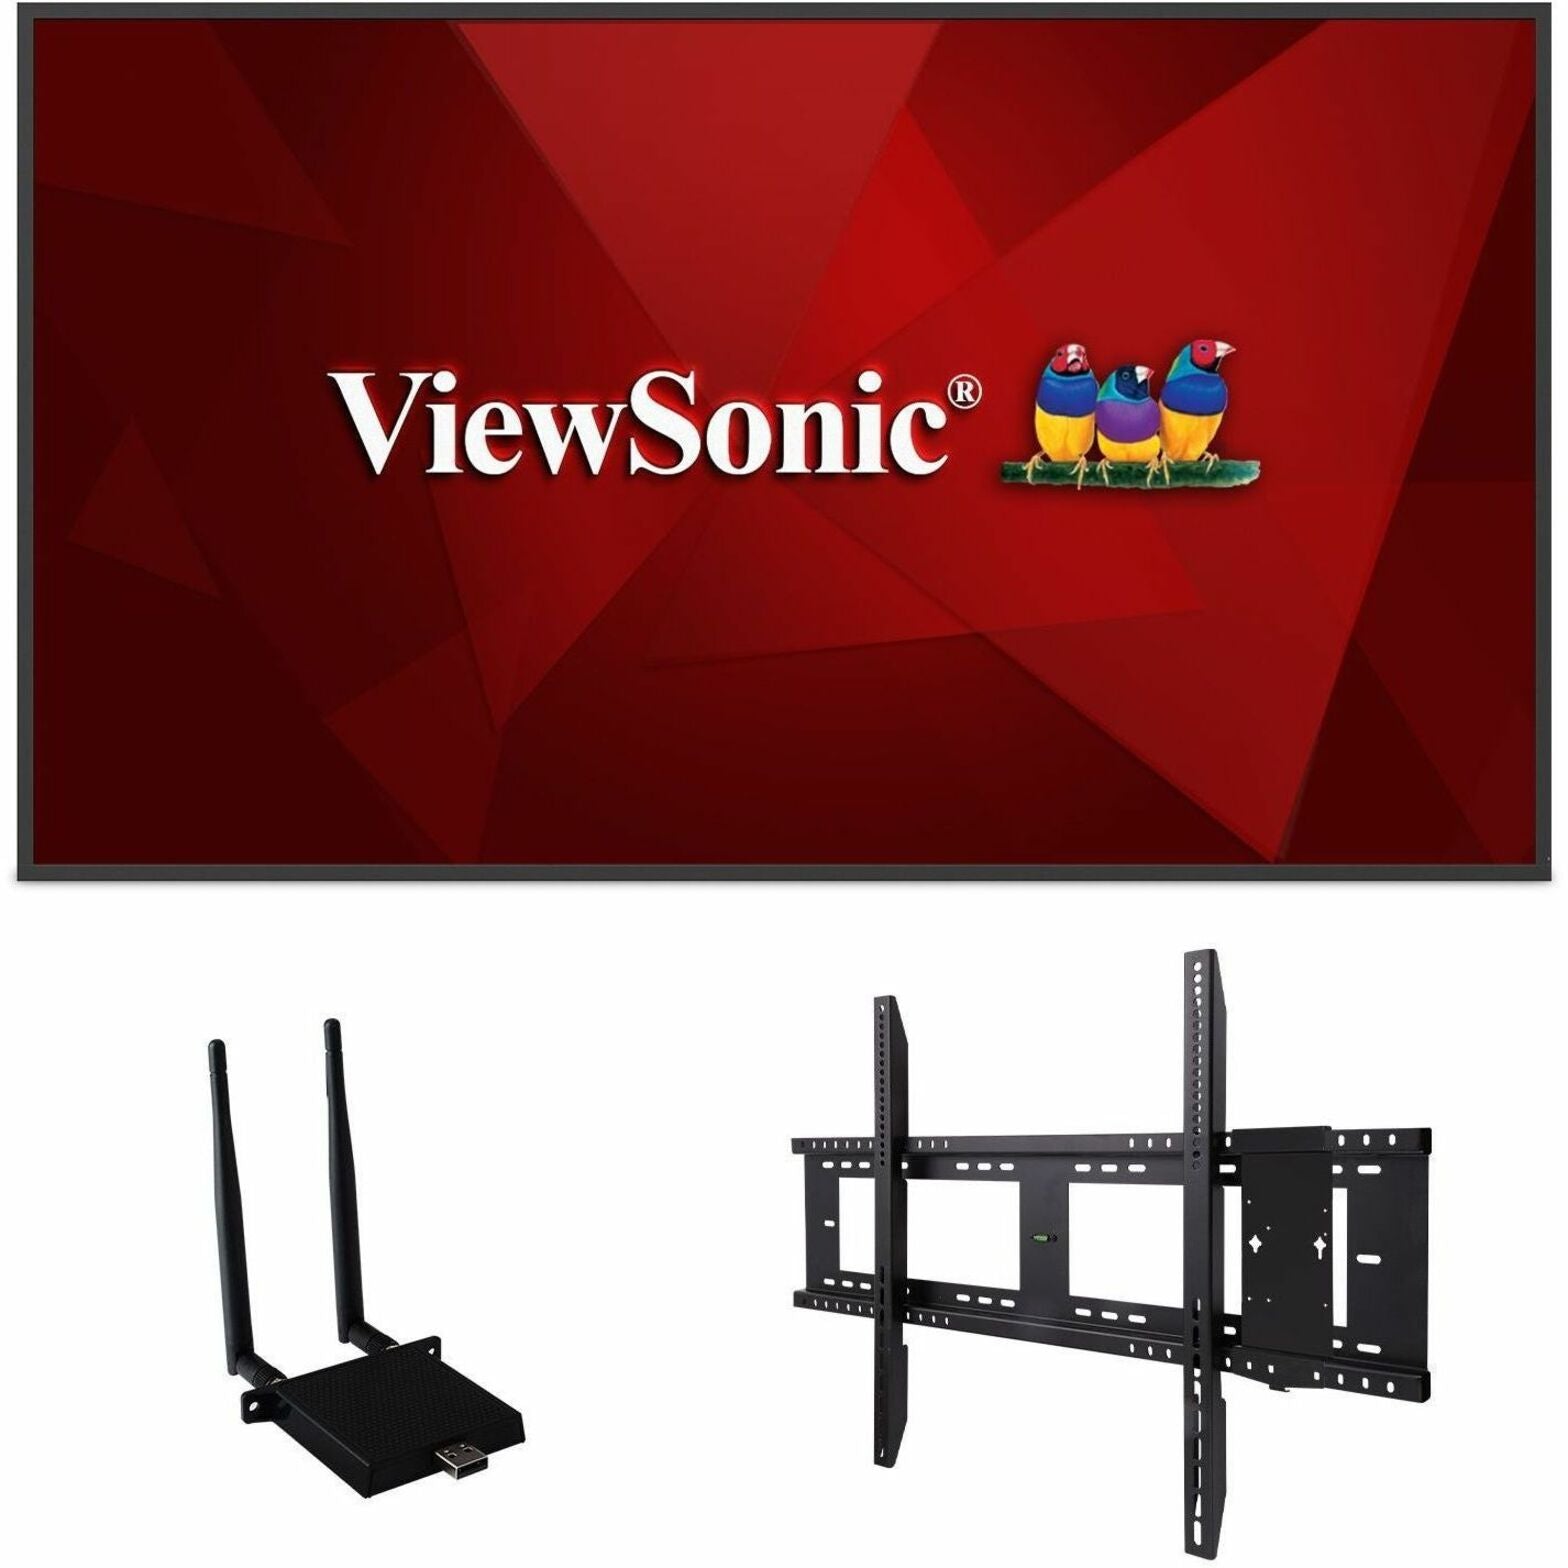 ViewSonic CDE6530-E1 Digital Signage Display, 4K, Integrated Software, WiFi Adapter and Fixed Wall Mount